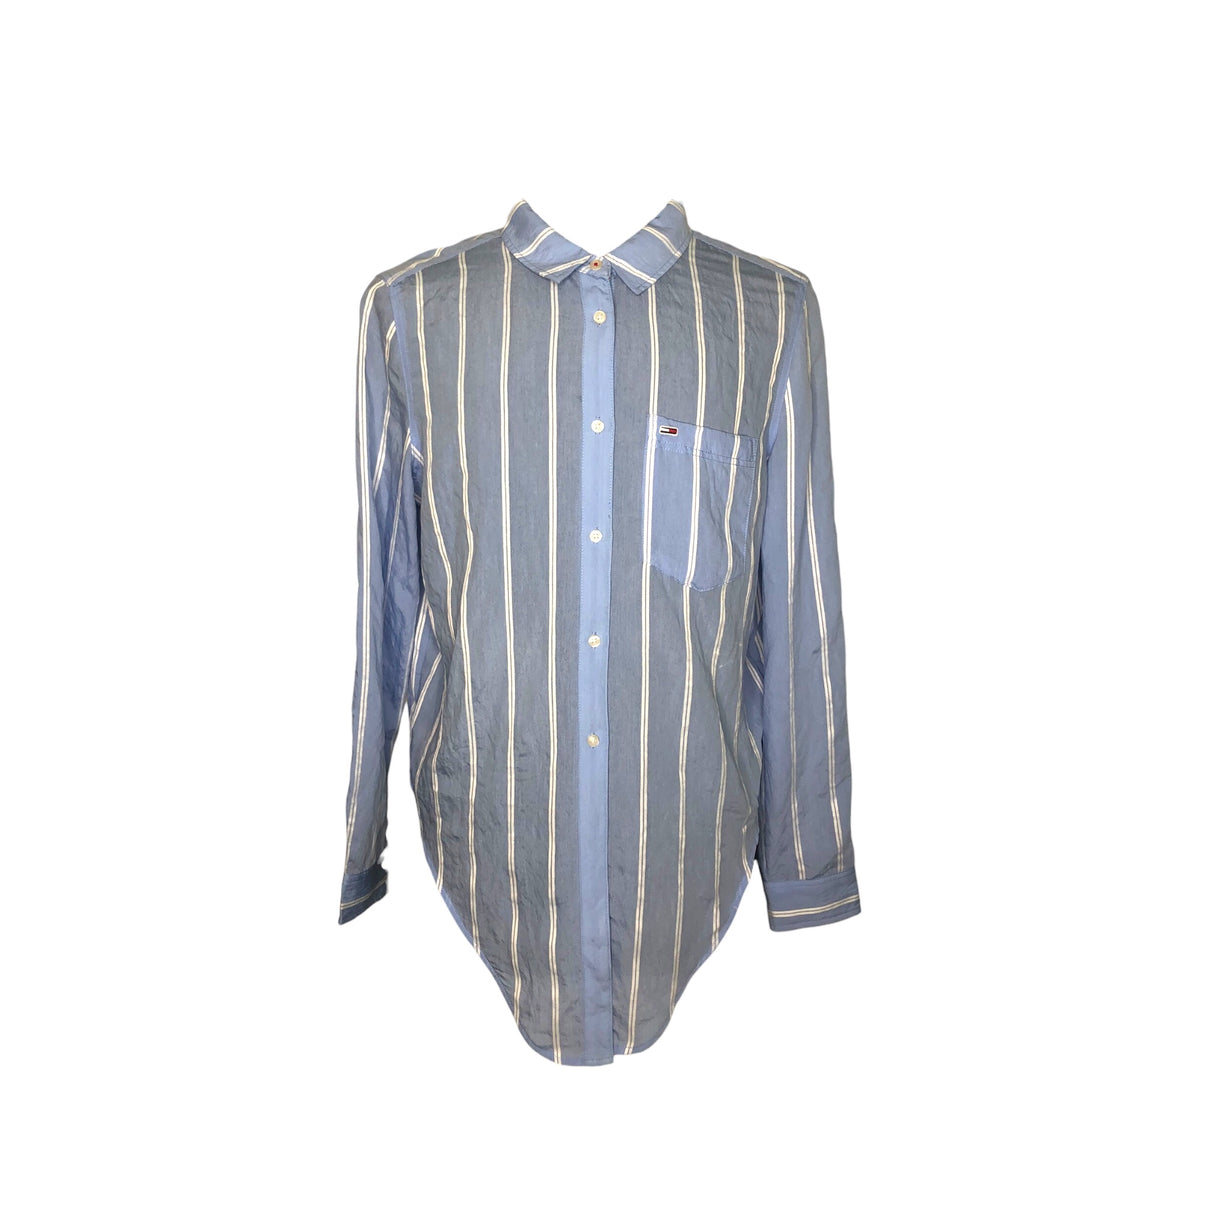 A second Chance - Tommy Jeans Long Sleeve shirt - Lebanon